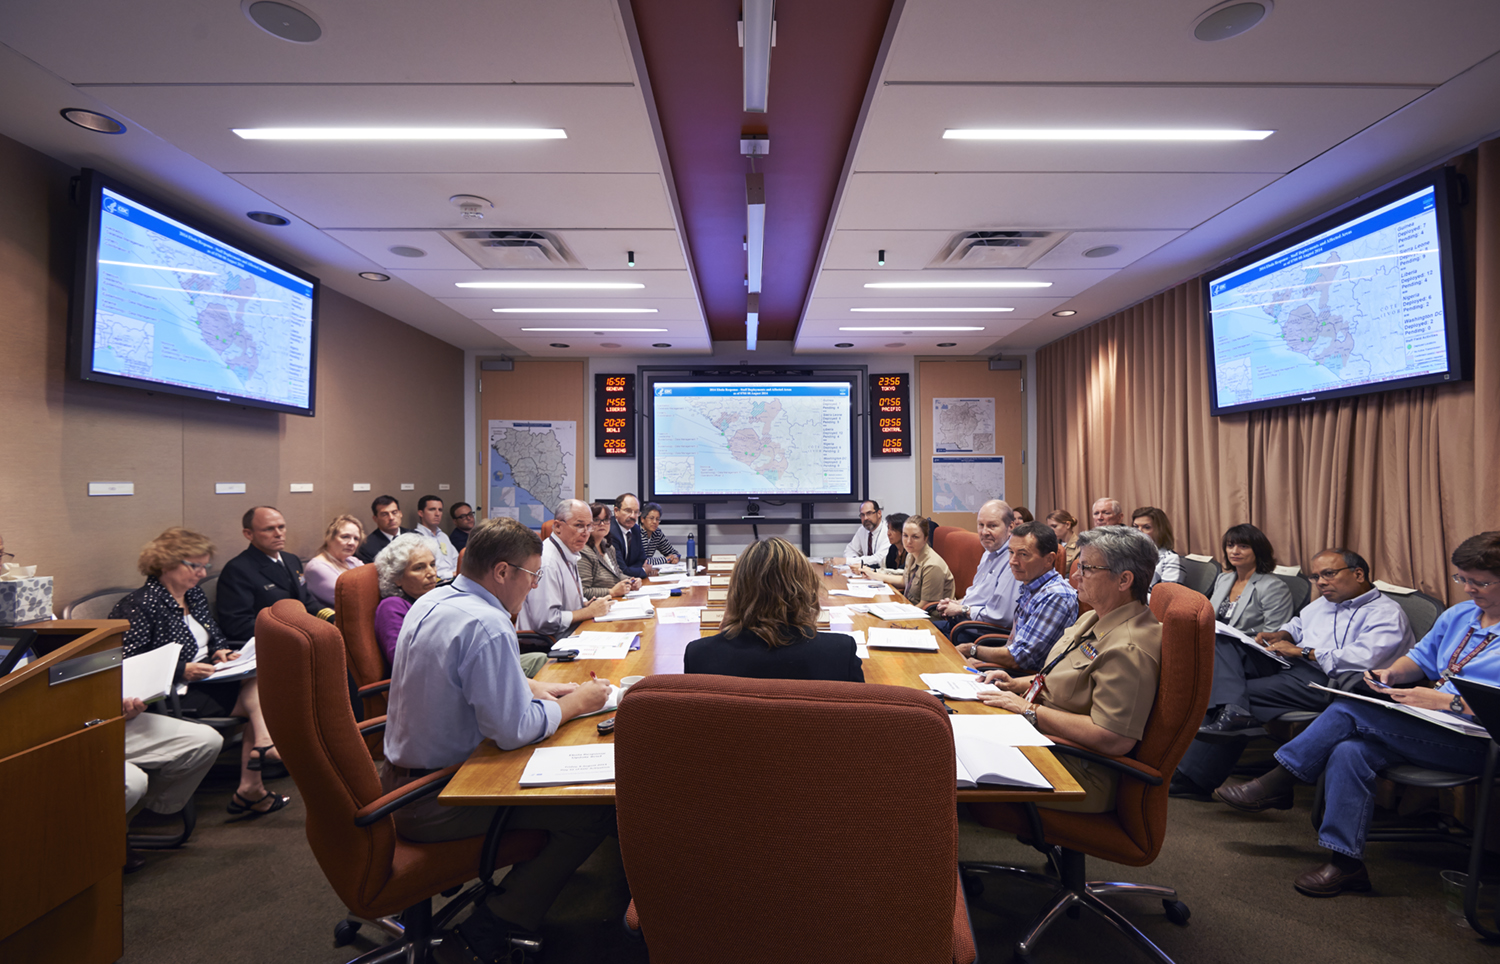 CDC leaders integral to the Ebola response, including epidemiologists, laboratorians, logistics, and more, assemble in agency’s command center to discuss next steps in directing the response at CDC Emergency operations center in Atlanta, August 8. (Spencer Lowell for TIME)